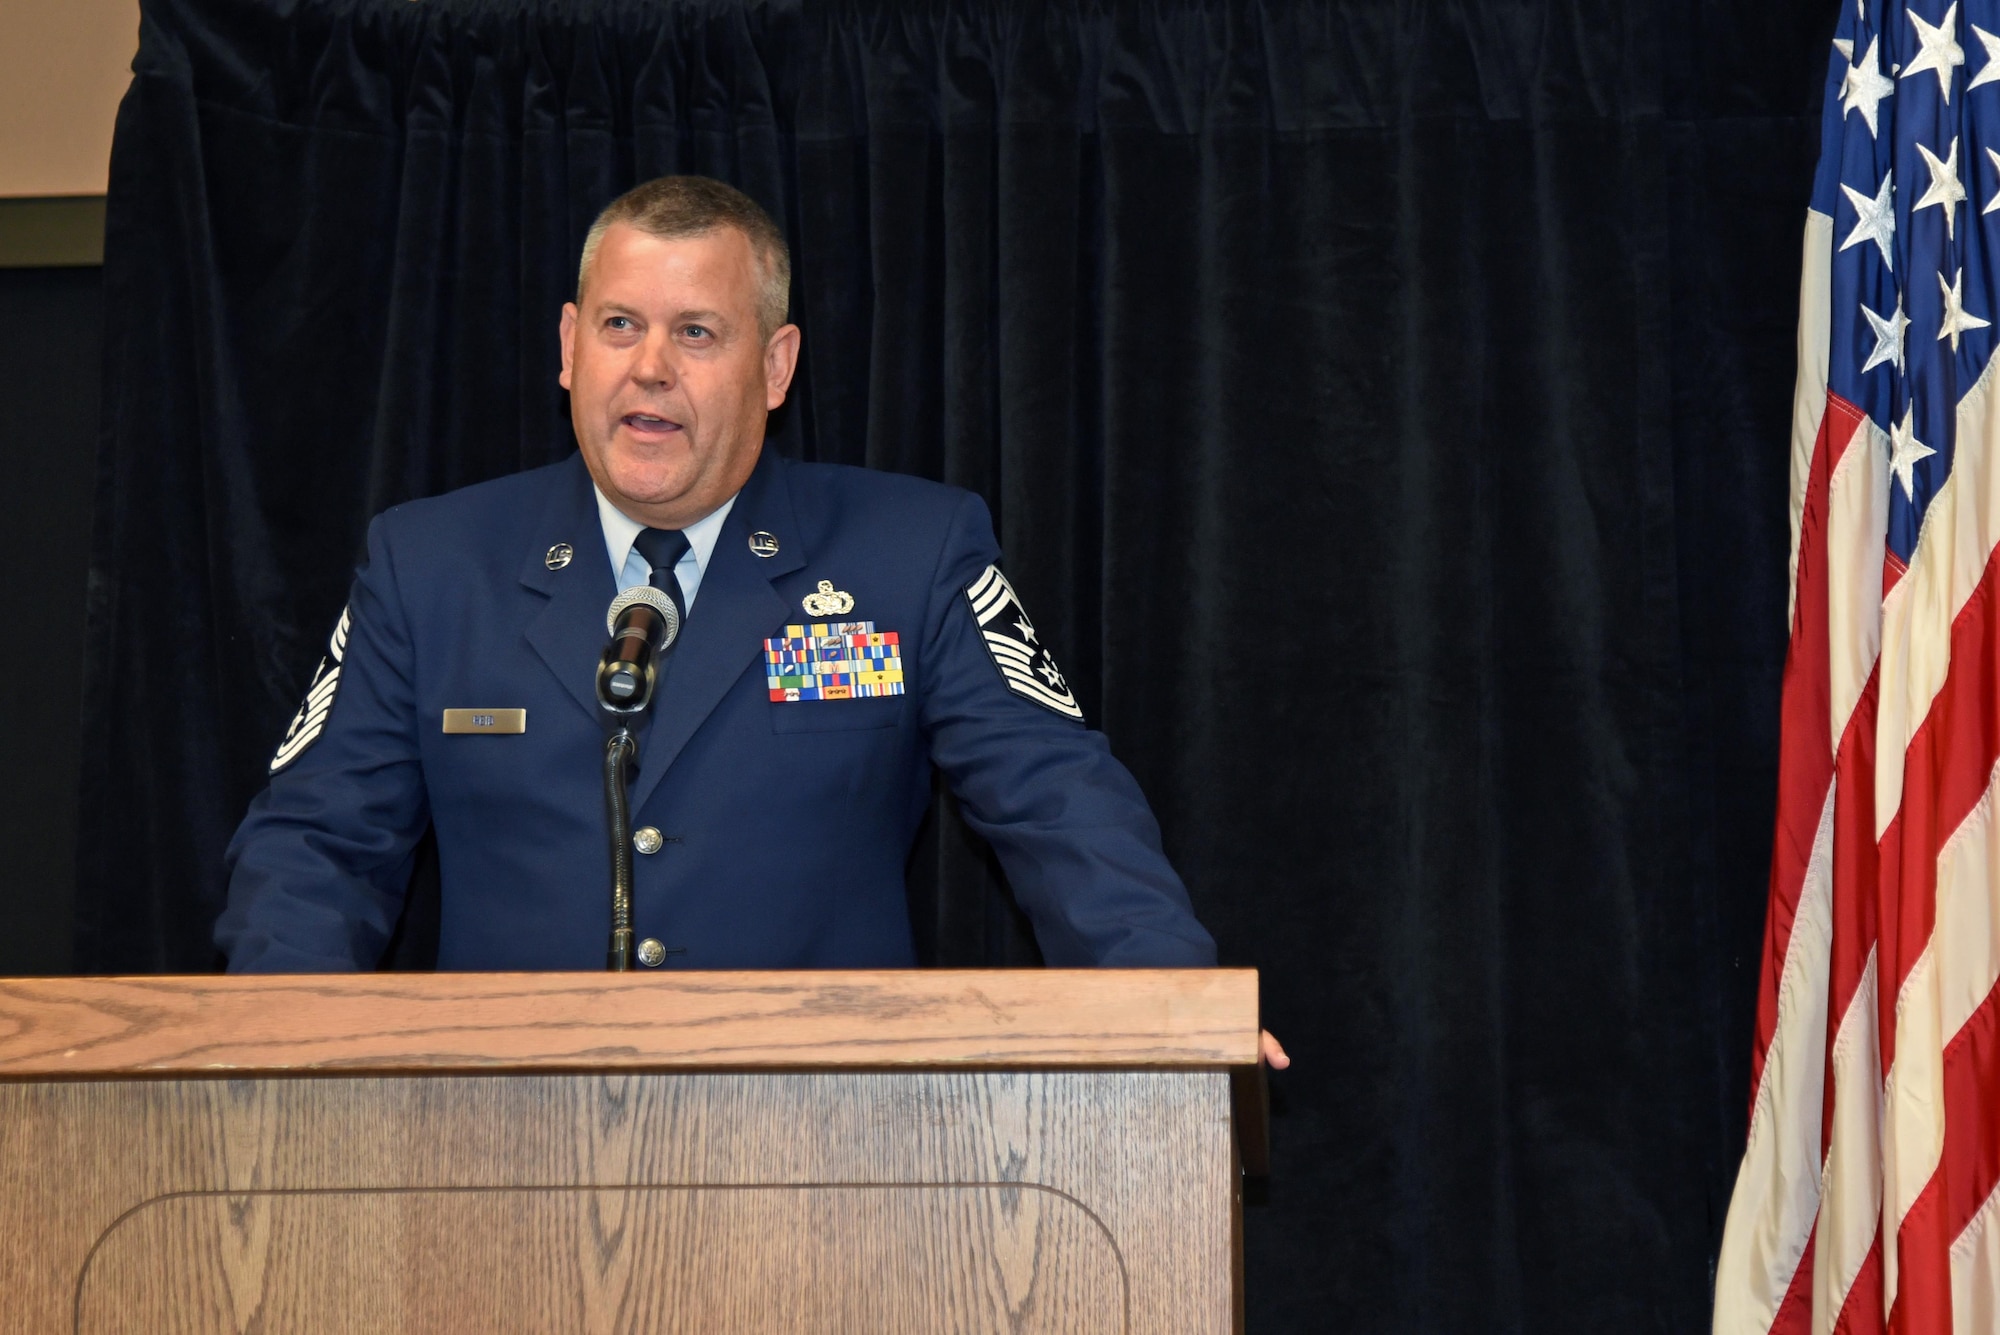 Chief Master Sgt. Bert A. Reid, 161st Air Refueling Wing command chief, addresses Airmen after assuming responsibility as the 161st ARW command chief, Oct. 7, 2017. Reid was previously the 161st Logistics Readiness Squadron chief enlisted manager and plans to use his wealth of knowledge and leadership to continually improve the enlisted Airmen’s success here at the wing. (Arizona Air National Guard photo by Staff Sgt. Dillon Davis / Released)